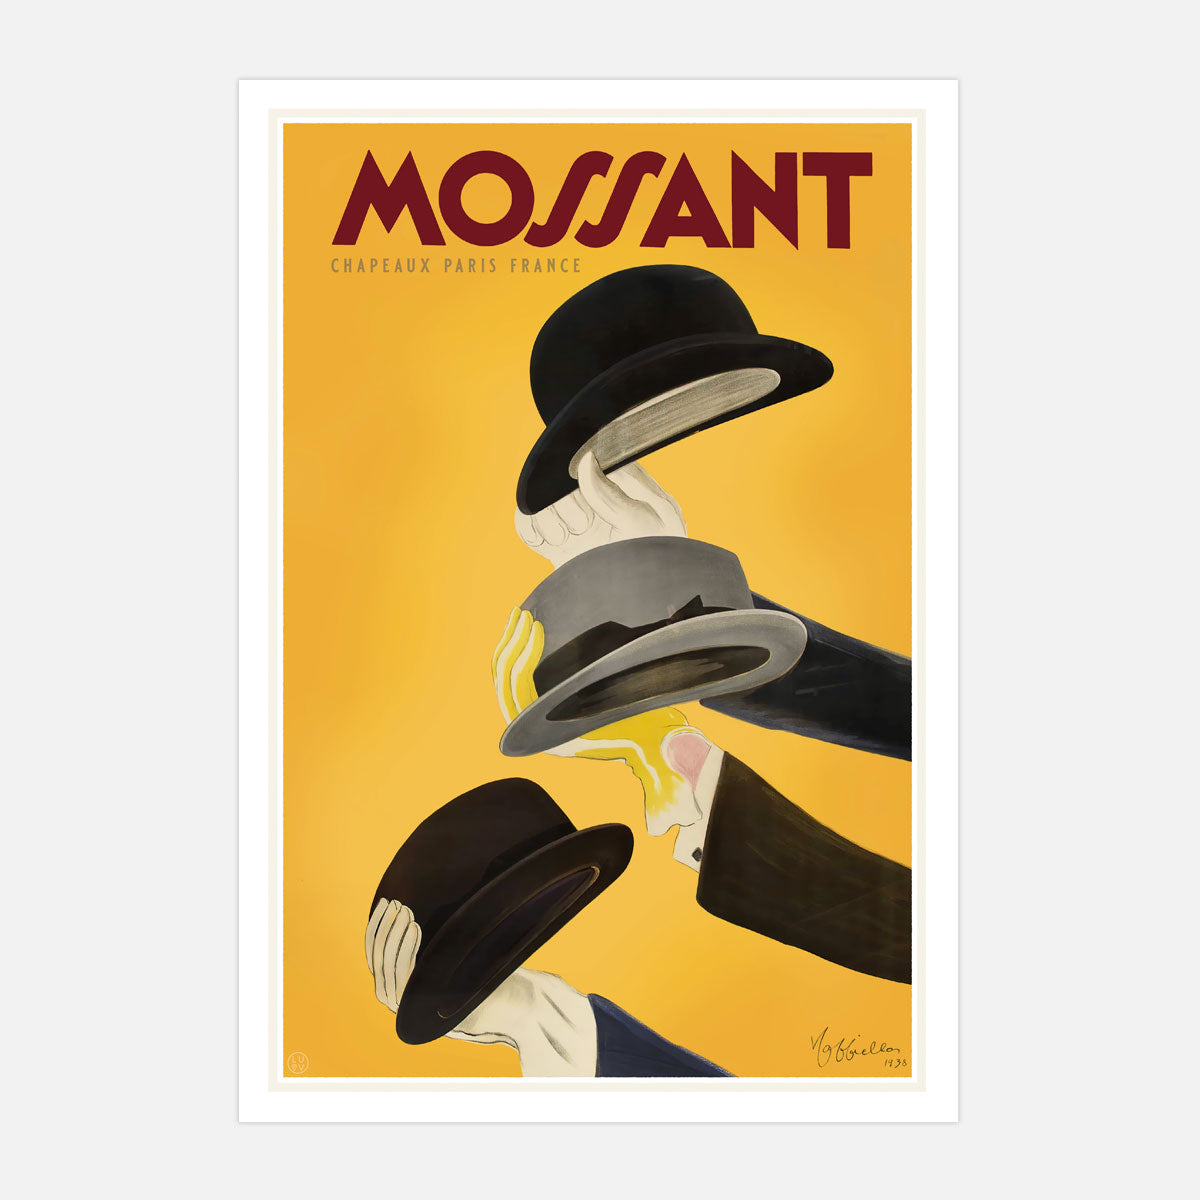 Mossant hats France vintage retro advertising print from Places We Luv